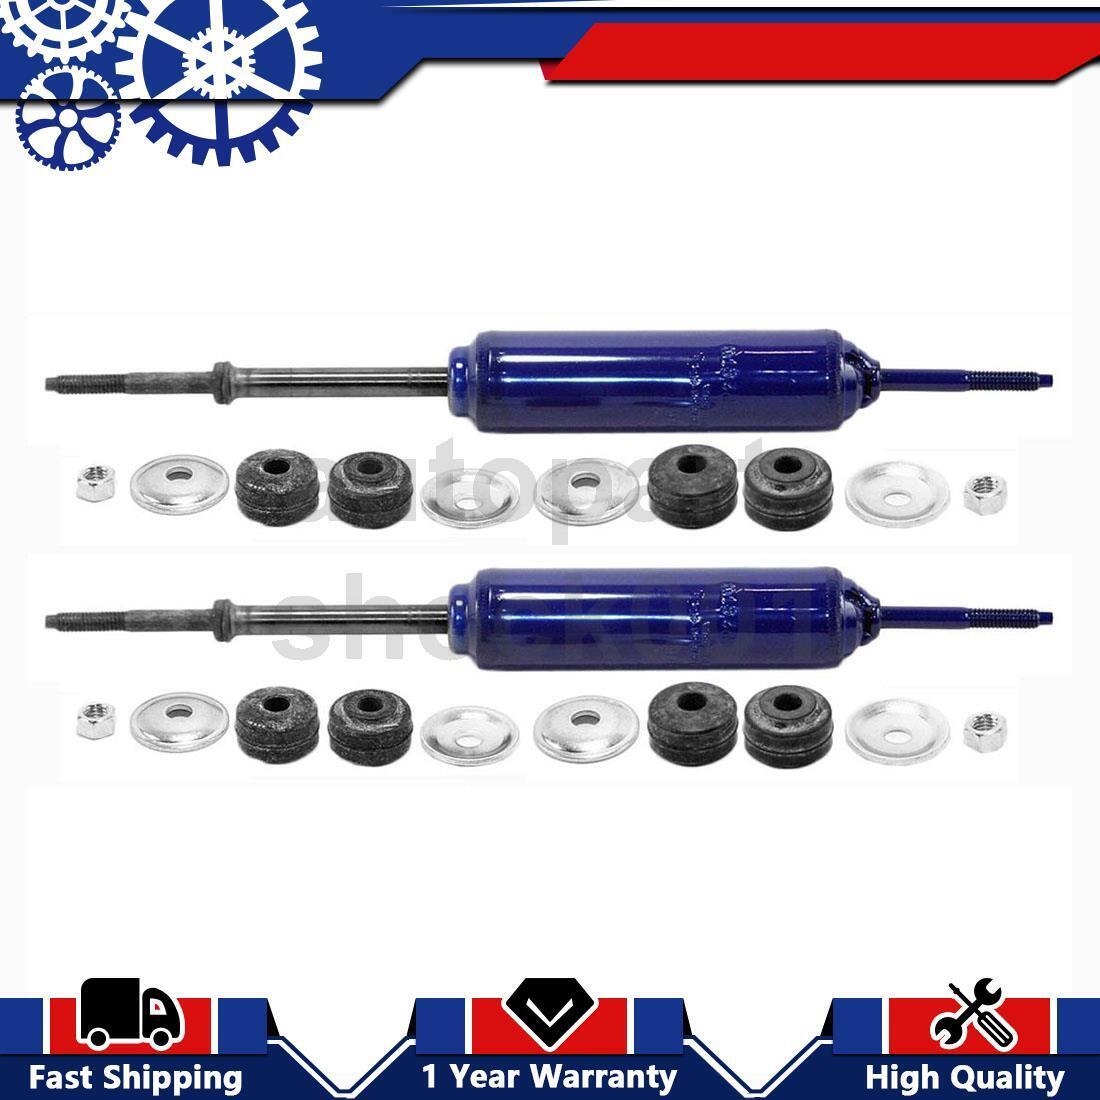 2 Front Monroe Shocks Shock Absorber For Plymouth Caravelle 1988 1981 1979